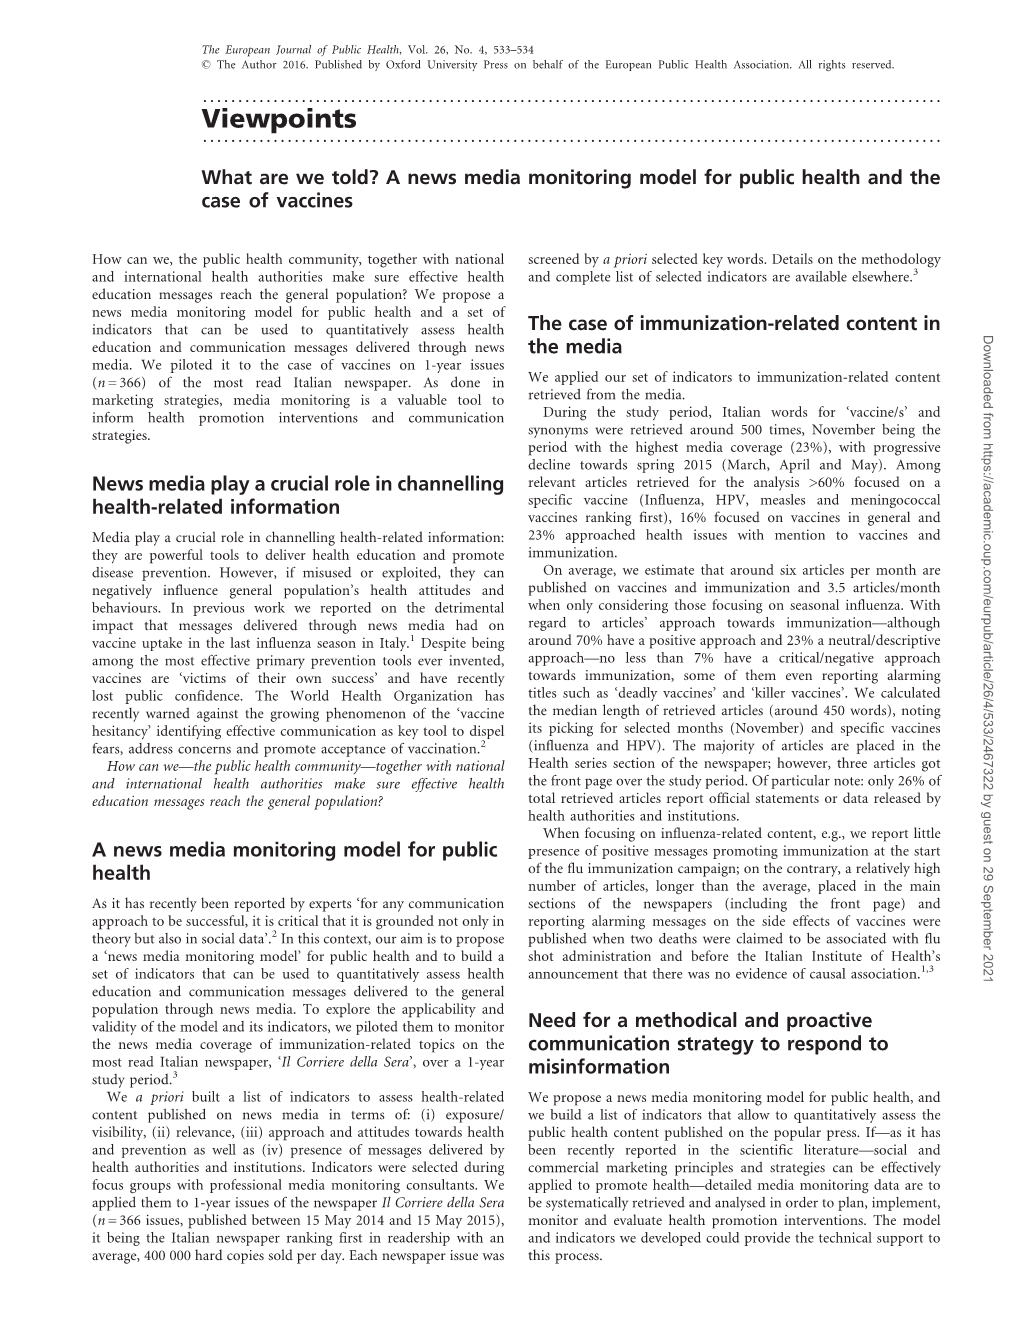 A News Media Monitoring Model for Public Health and the Case of Vaccines